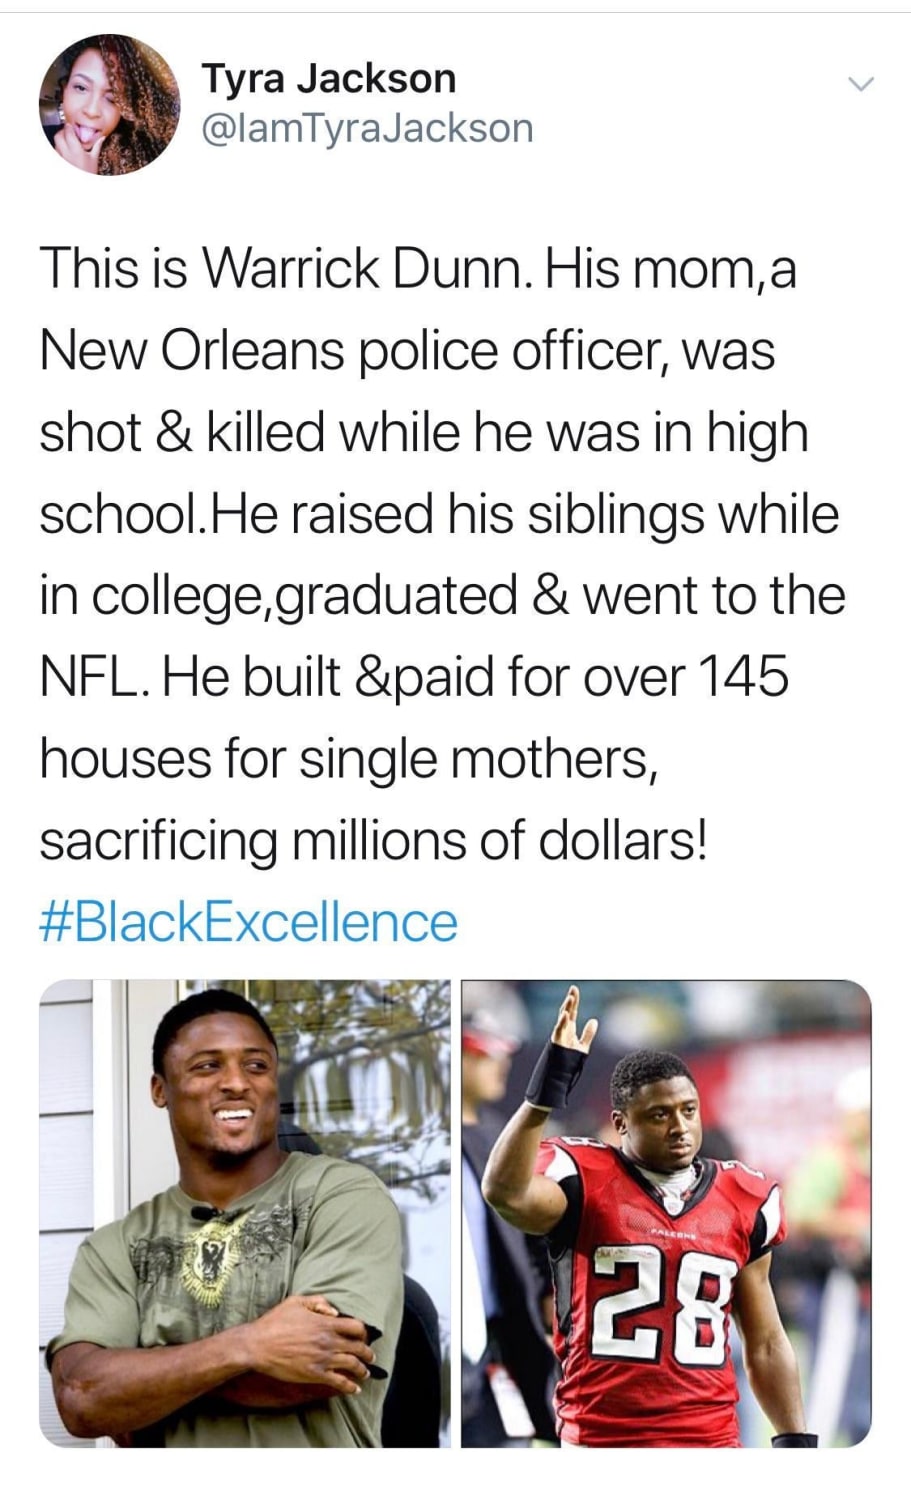 Warrick Dunn, a True Hero: You will never hear this from the media